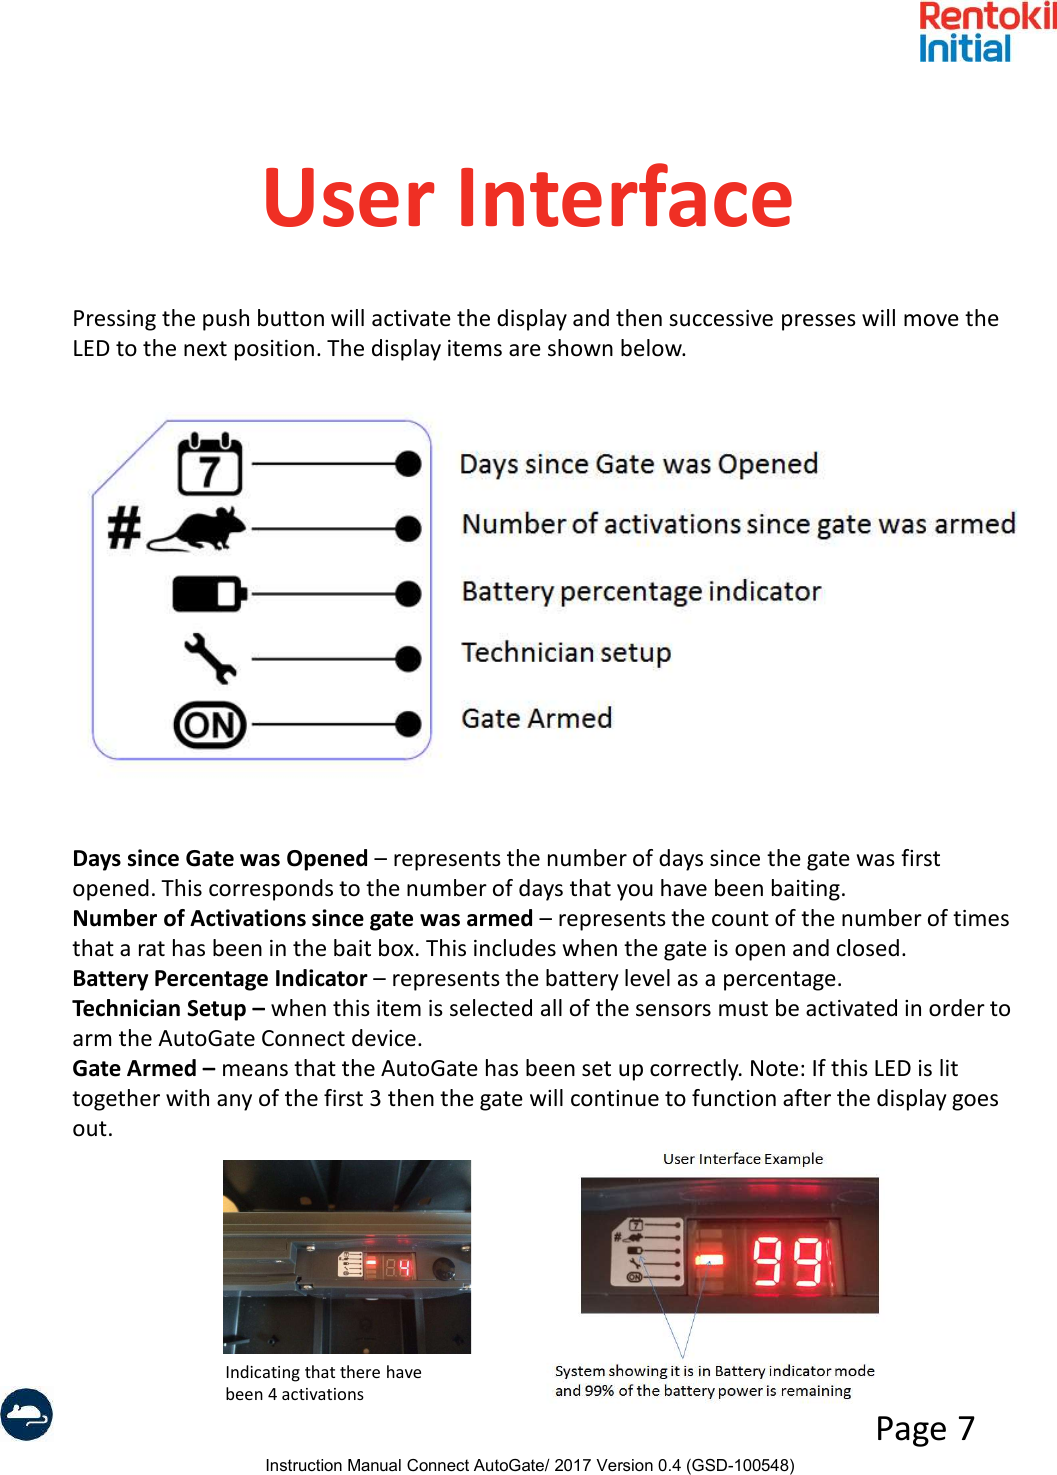 Instruction Manual Connect AutoGate/ 2017 Version 0.4 (GSD-100548)Page 7User InterfacePressing the push button will activate the display and then successive presses will move the LED to the next position. The display items are shown below.Days since Gate was Opened – represents the number of days since the gate was first opened. This corresponds to the number of days that you have been baiting.Number of Activations since gate was armed – represents the count of the number of times that a rat has been in the bait box. This includes when the gate is open and closed.Battery Percentage Indicator – represents the battery level as a percentage.Technician Setup – when this item is selected all of the sensors must be activated in order to arm the AutoGate Connect device.Gate Armed – means that the AutoGate has been set up correctly. Note: If this LED is lit together with any of the first 3 then the gate will continue to function after the display goes out.Indicating that there have been 4 activations